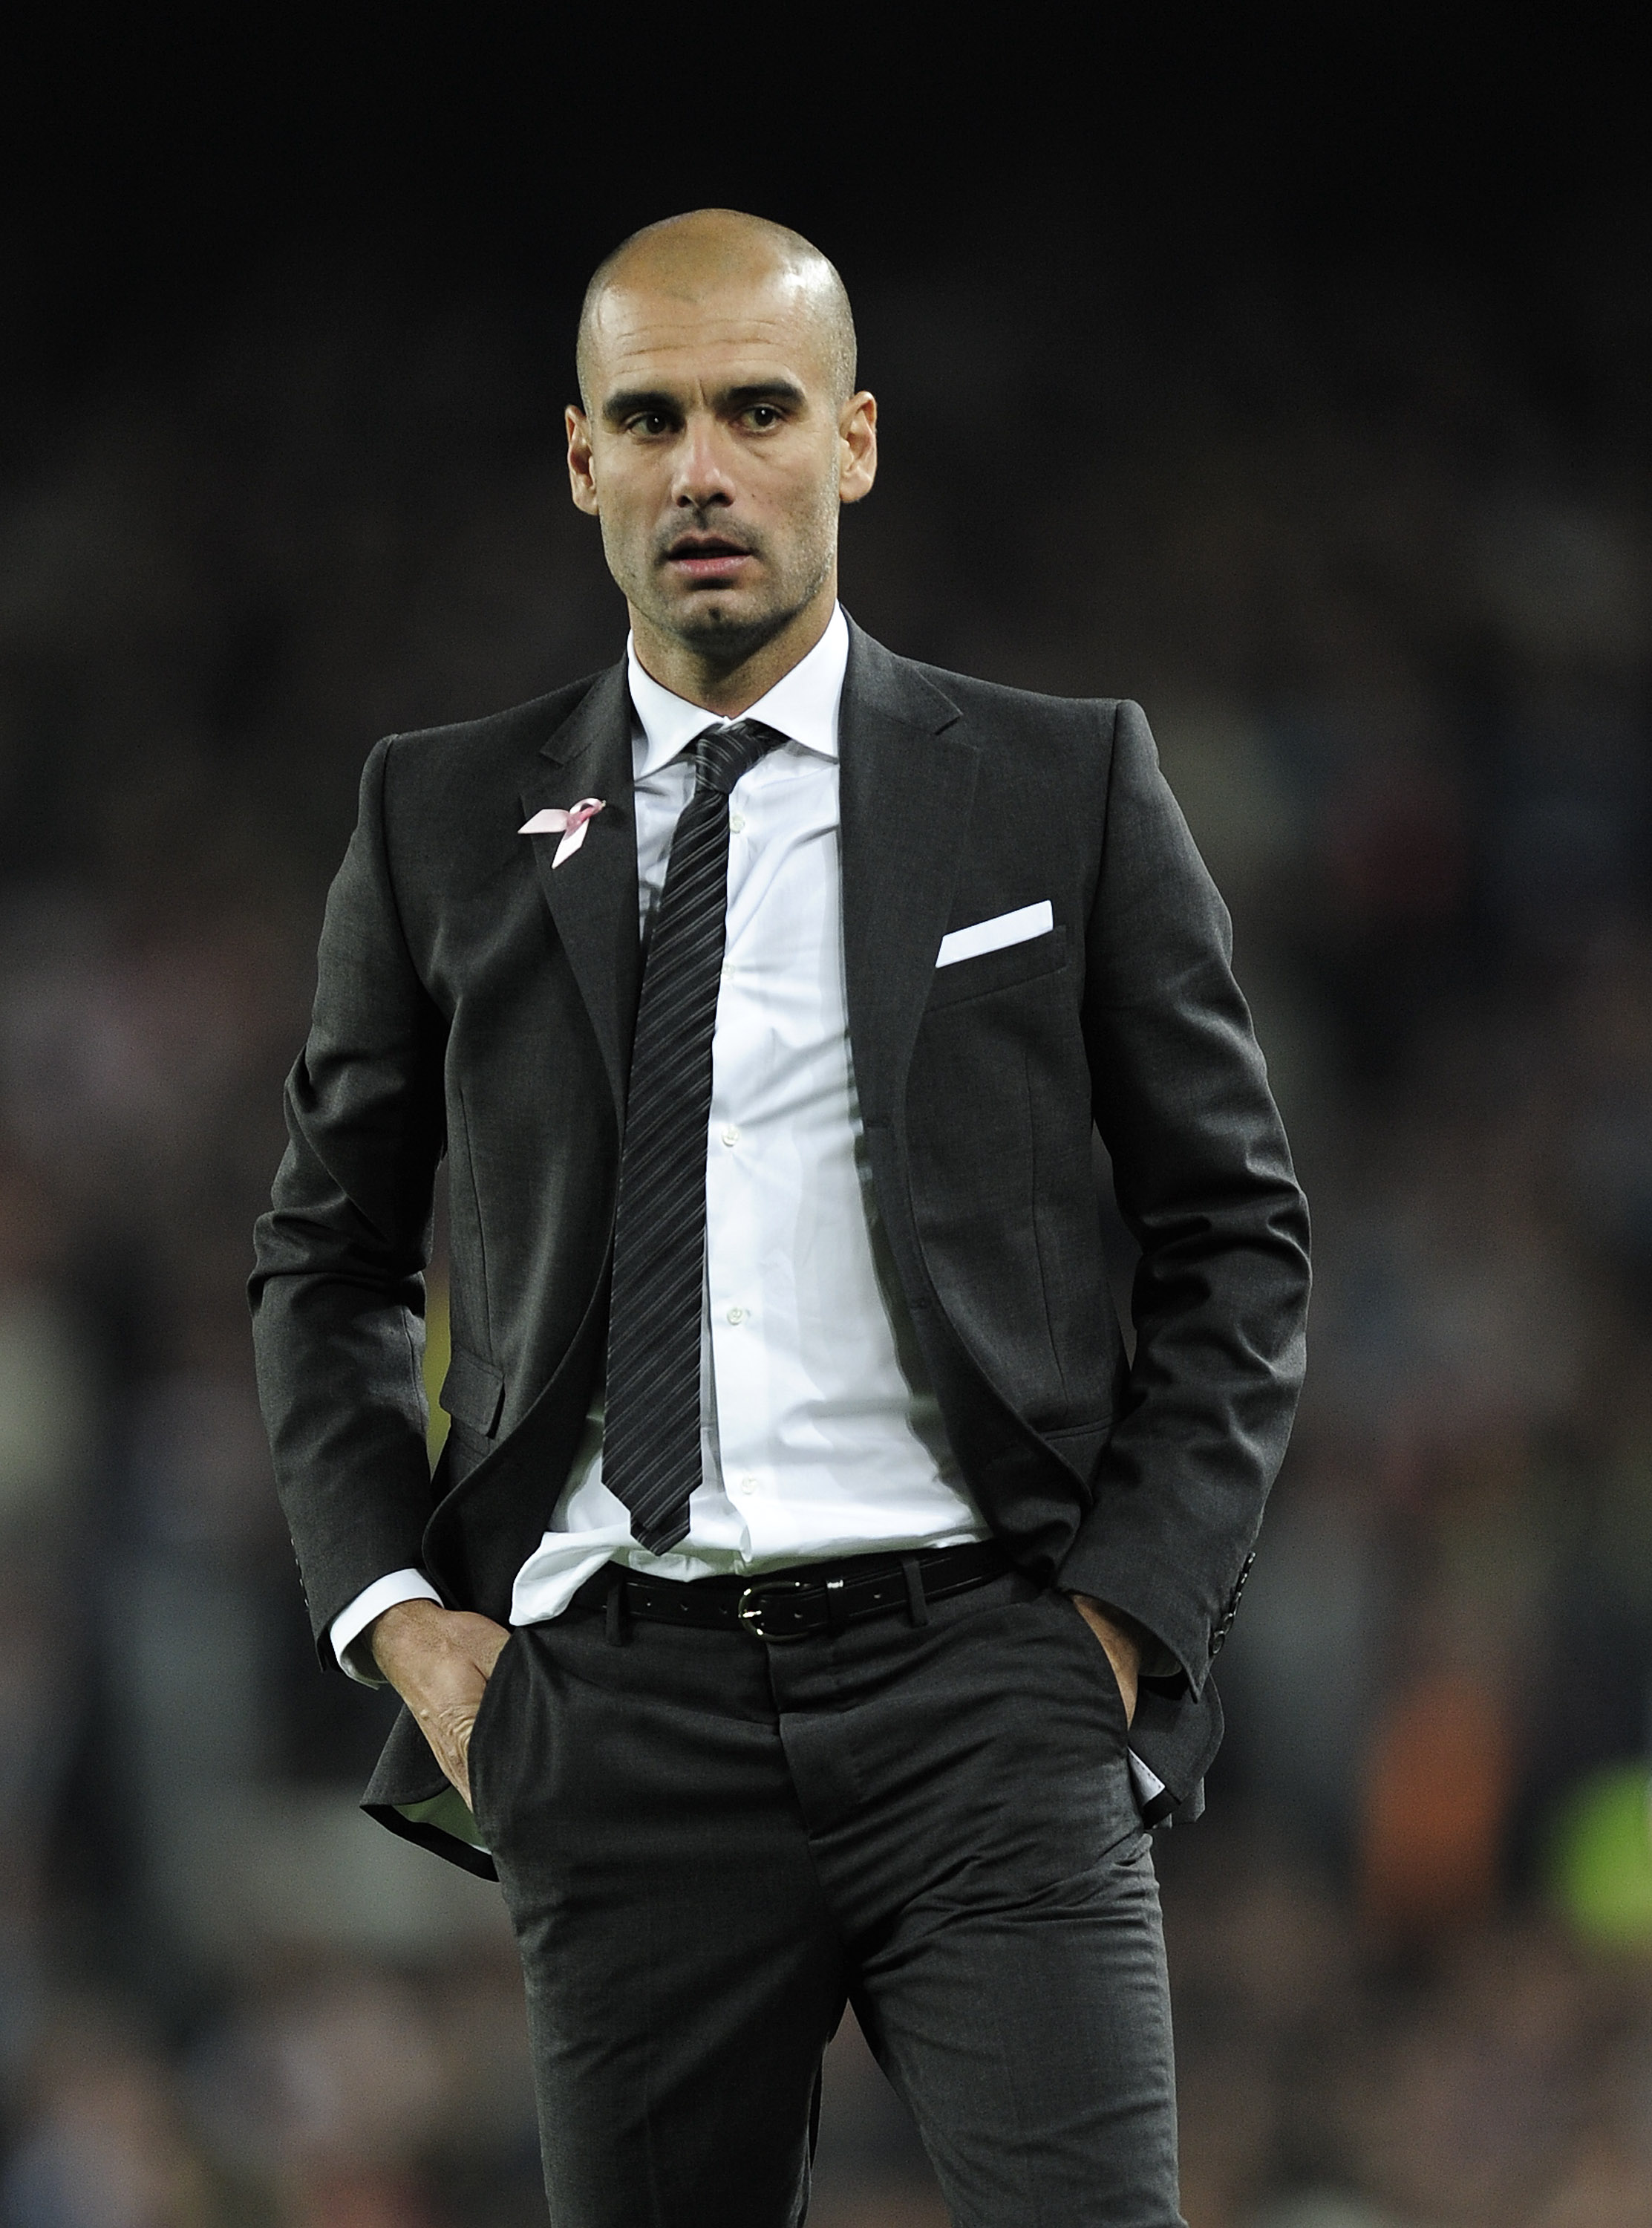 BARCELONA, SPAIN - OCTOBER 16:  Head coach Josep Guardiola of Barcelona looks on during the La Liga match between Barcelona and Valencia at the Camp Nou stadium on October 16, 2010 in Barcelona, Spain.  (Photo by David Ramos/Getty Images)